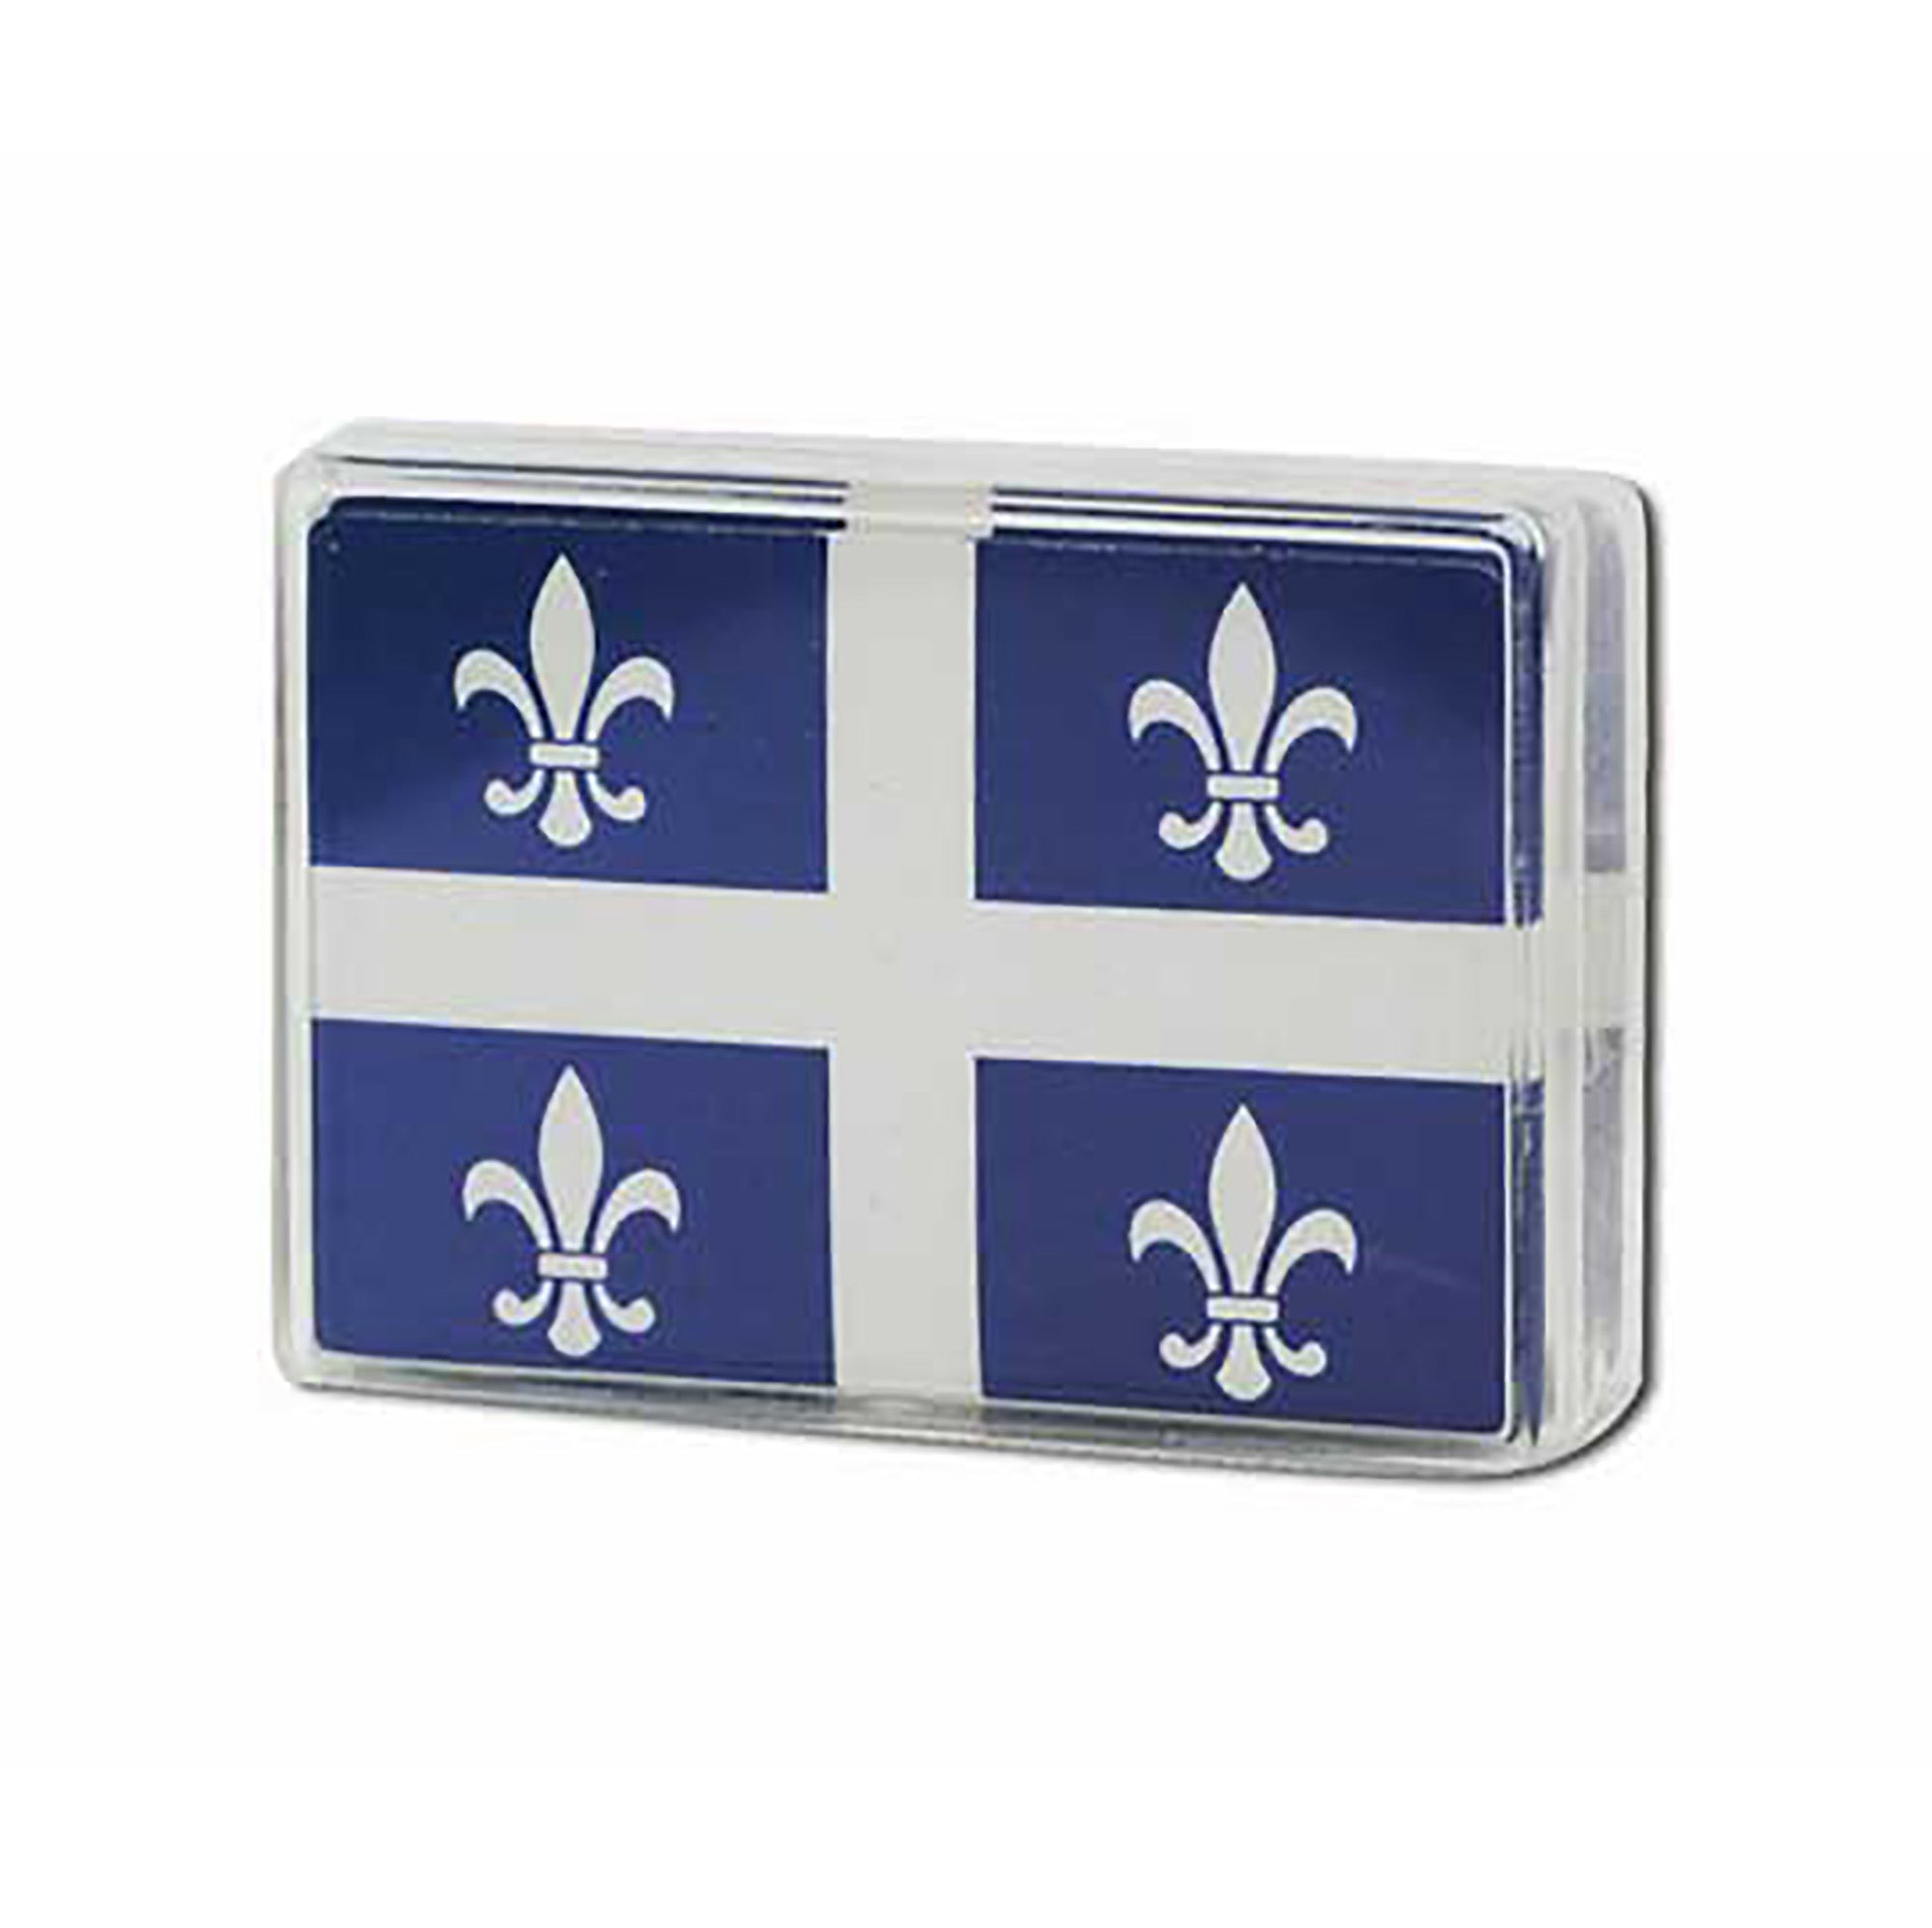 Québec Playing Card - Plastic-coated 3.5x2.5in